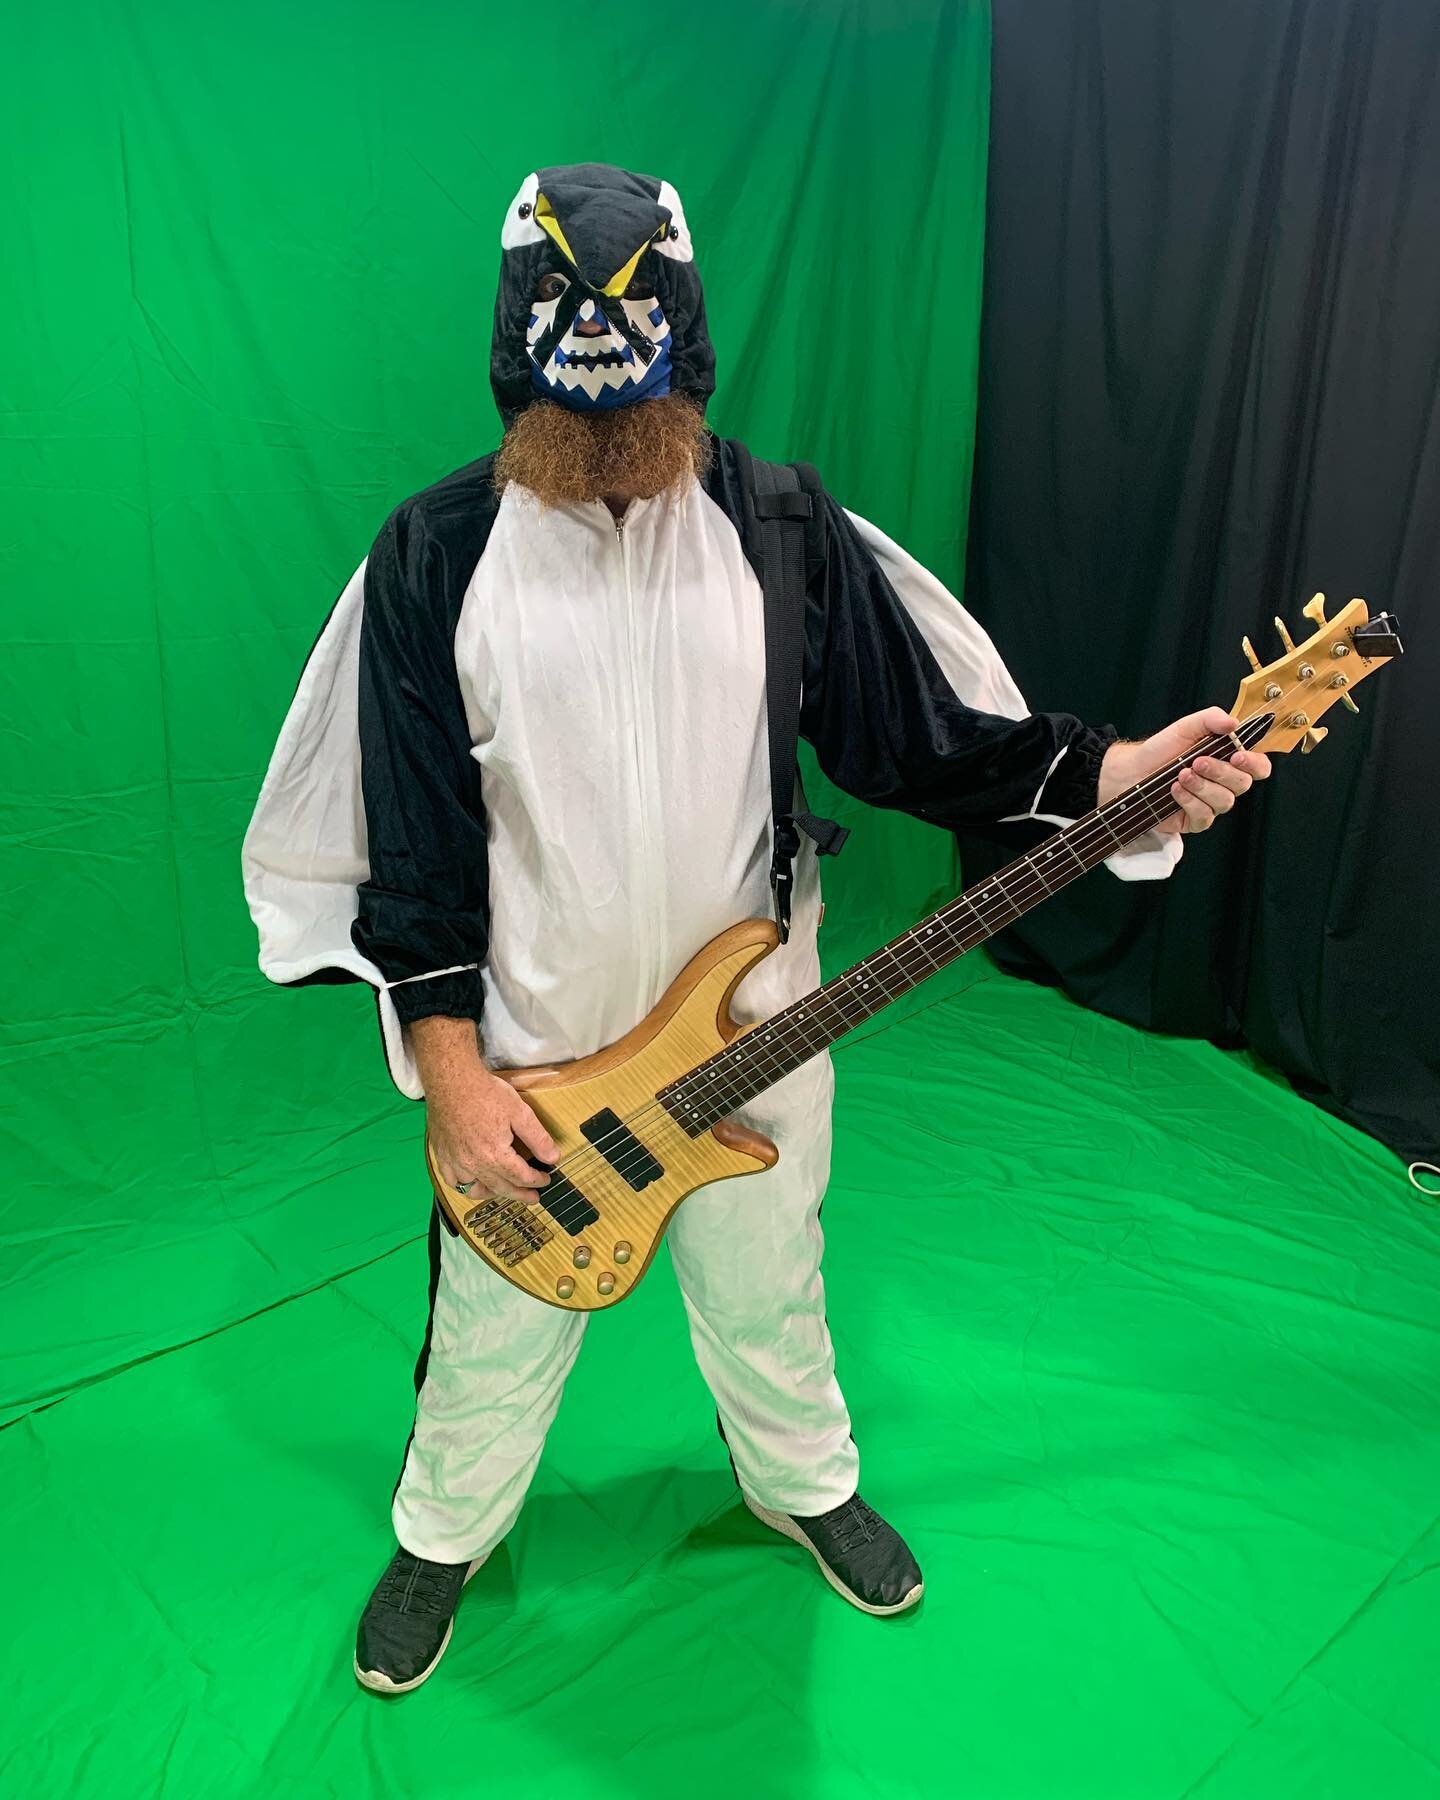 Let us know what you think this is for. I&rsquo;d say wrong ideas only but honestly what the hell could this possibly be used for. #jacobiscool #bassplayers #artproject #greenscreen #metal #toxicon